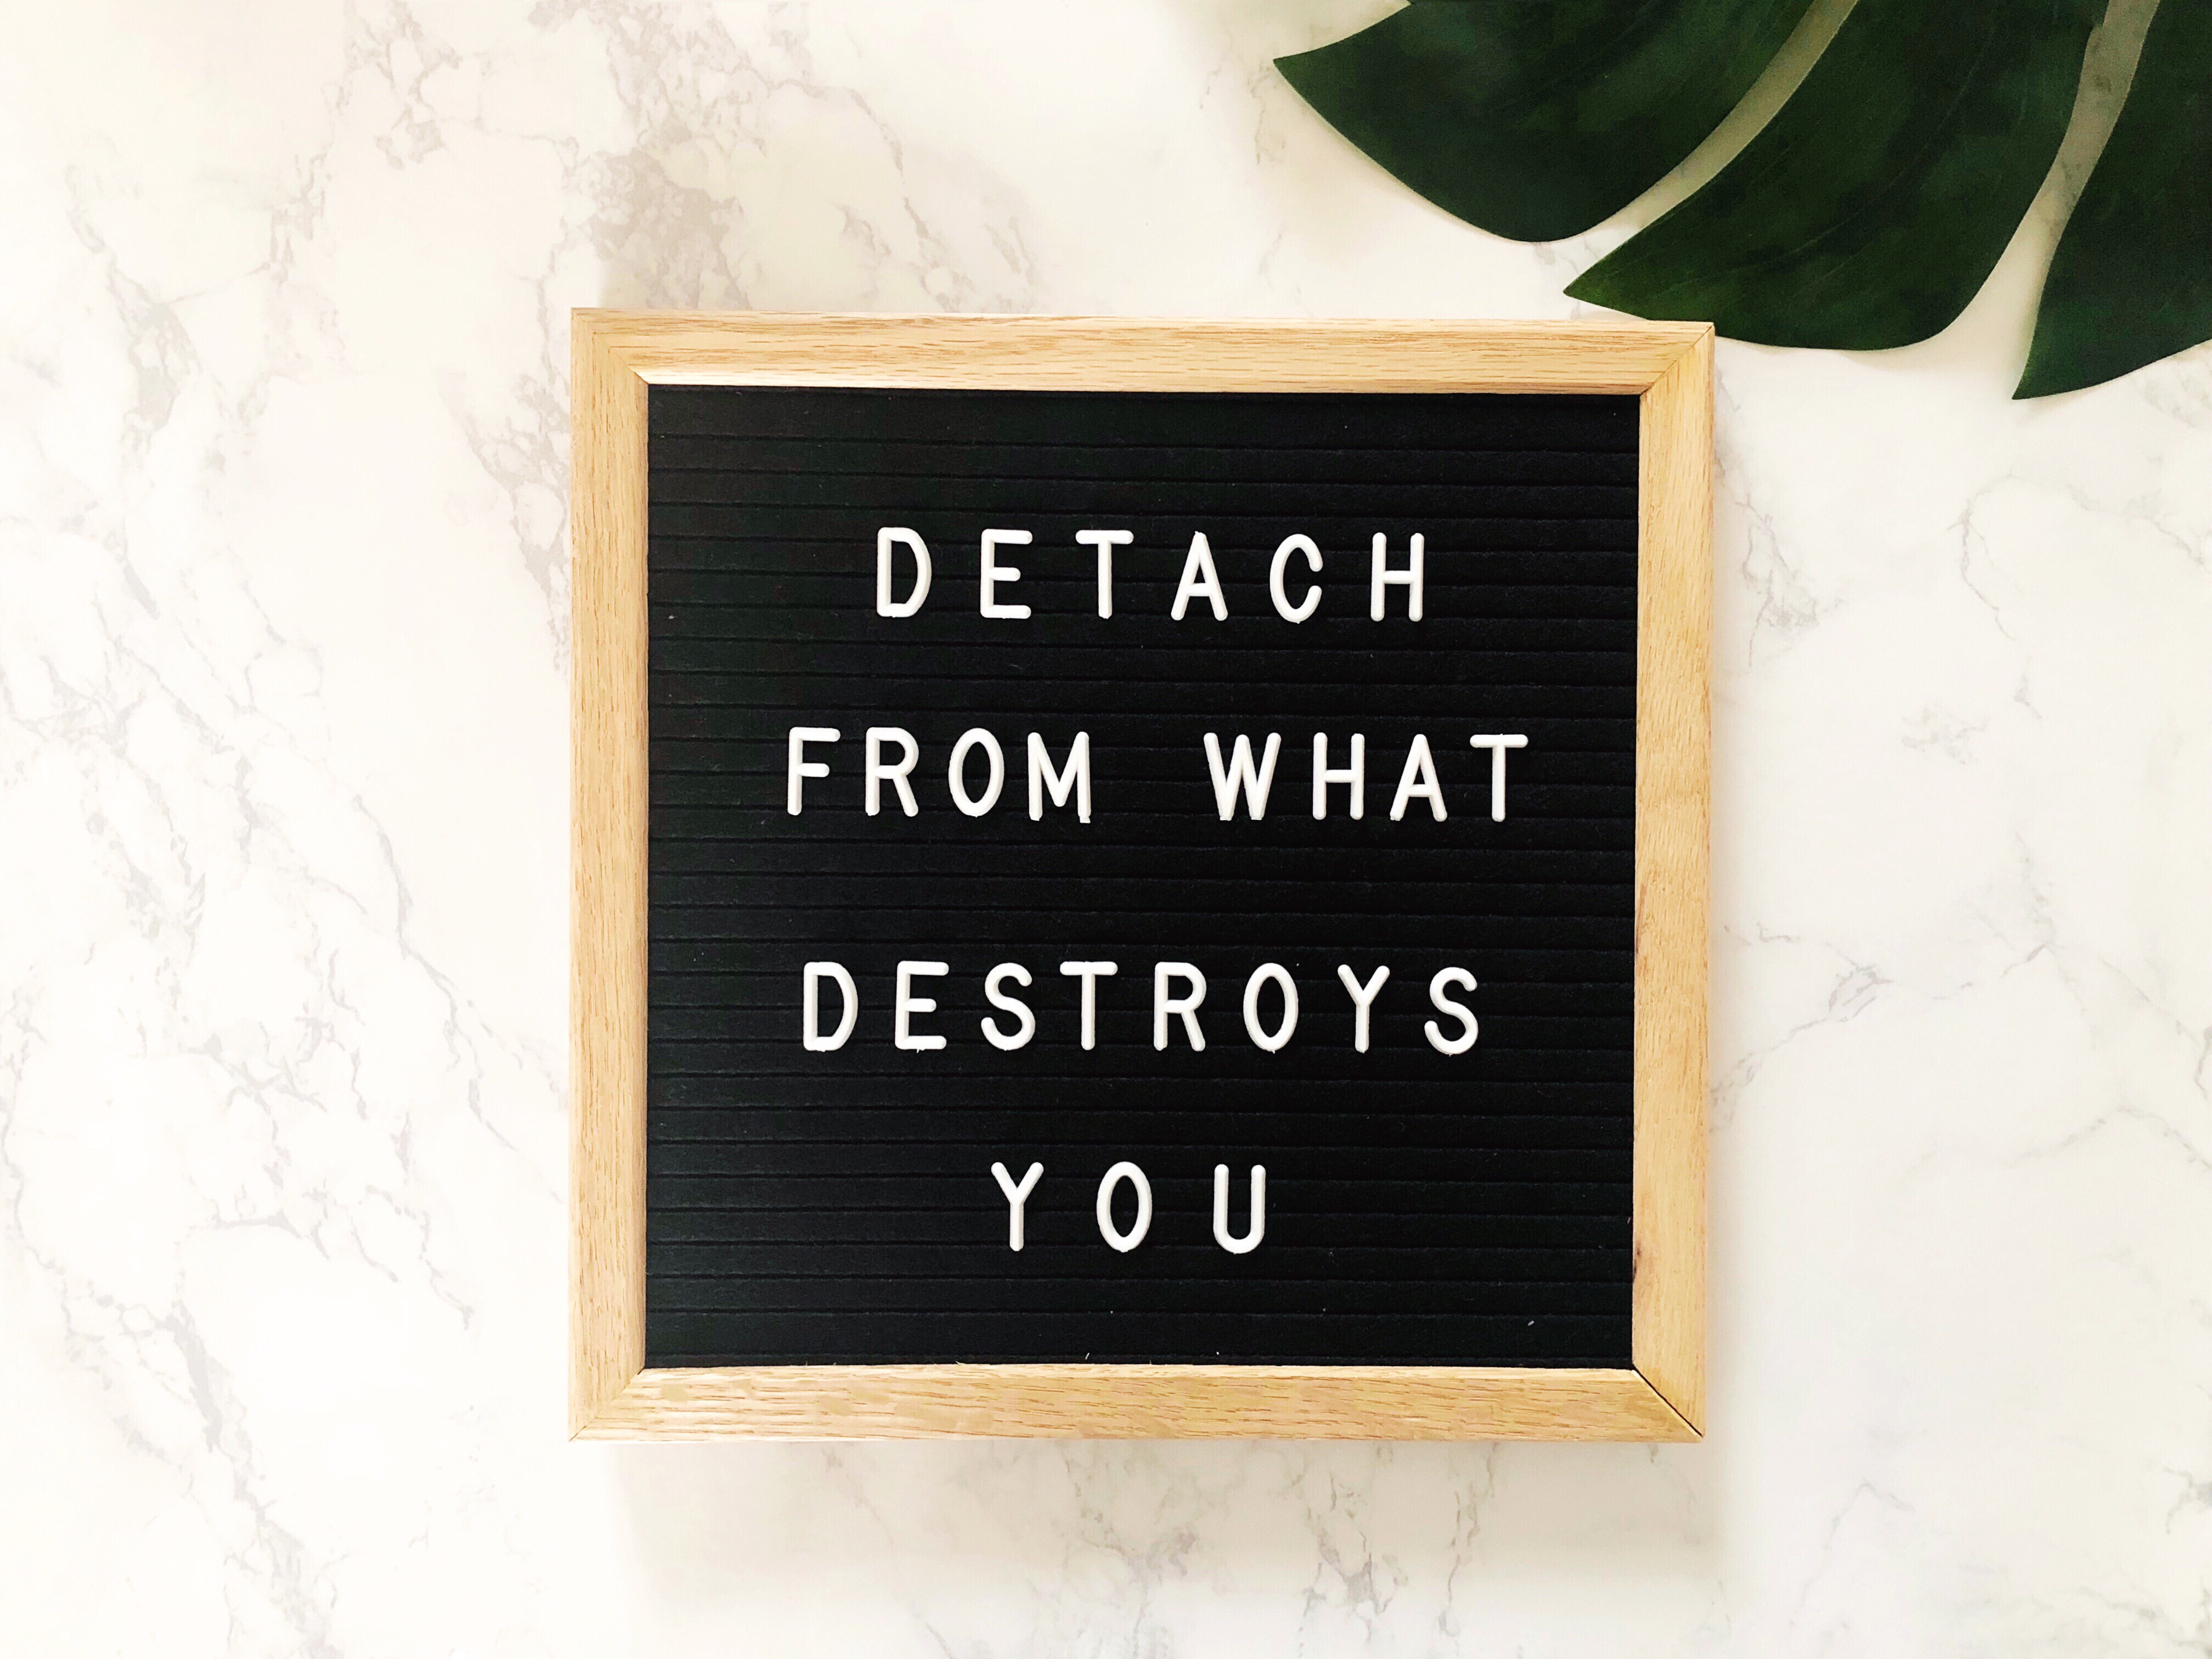 detach-from-what-destroys-you-quote-quotes-wise-words-great-quote-positive-quotes-life-quote-quotes_t20_gopA87